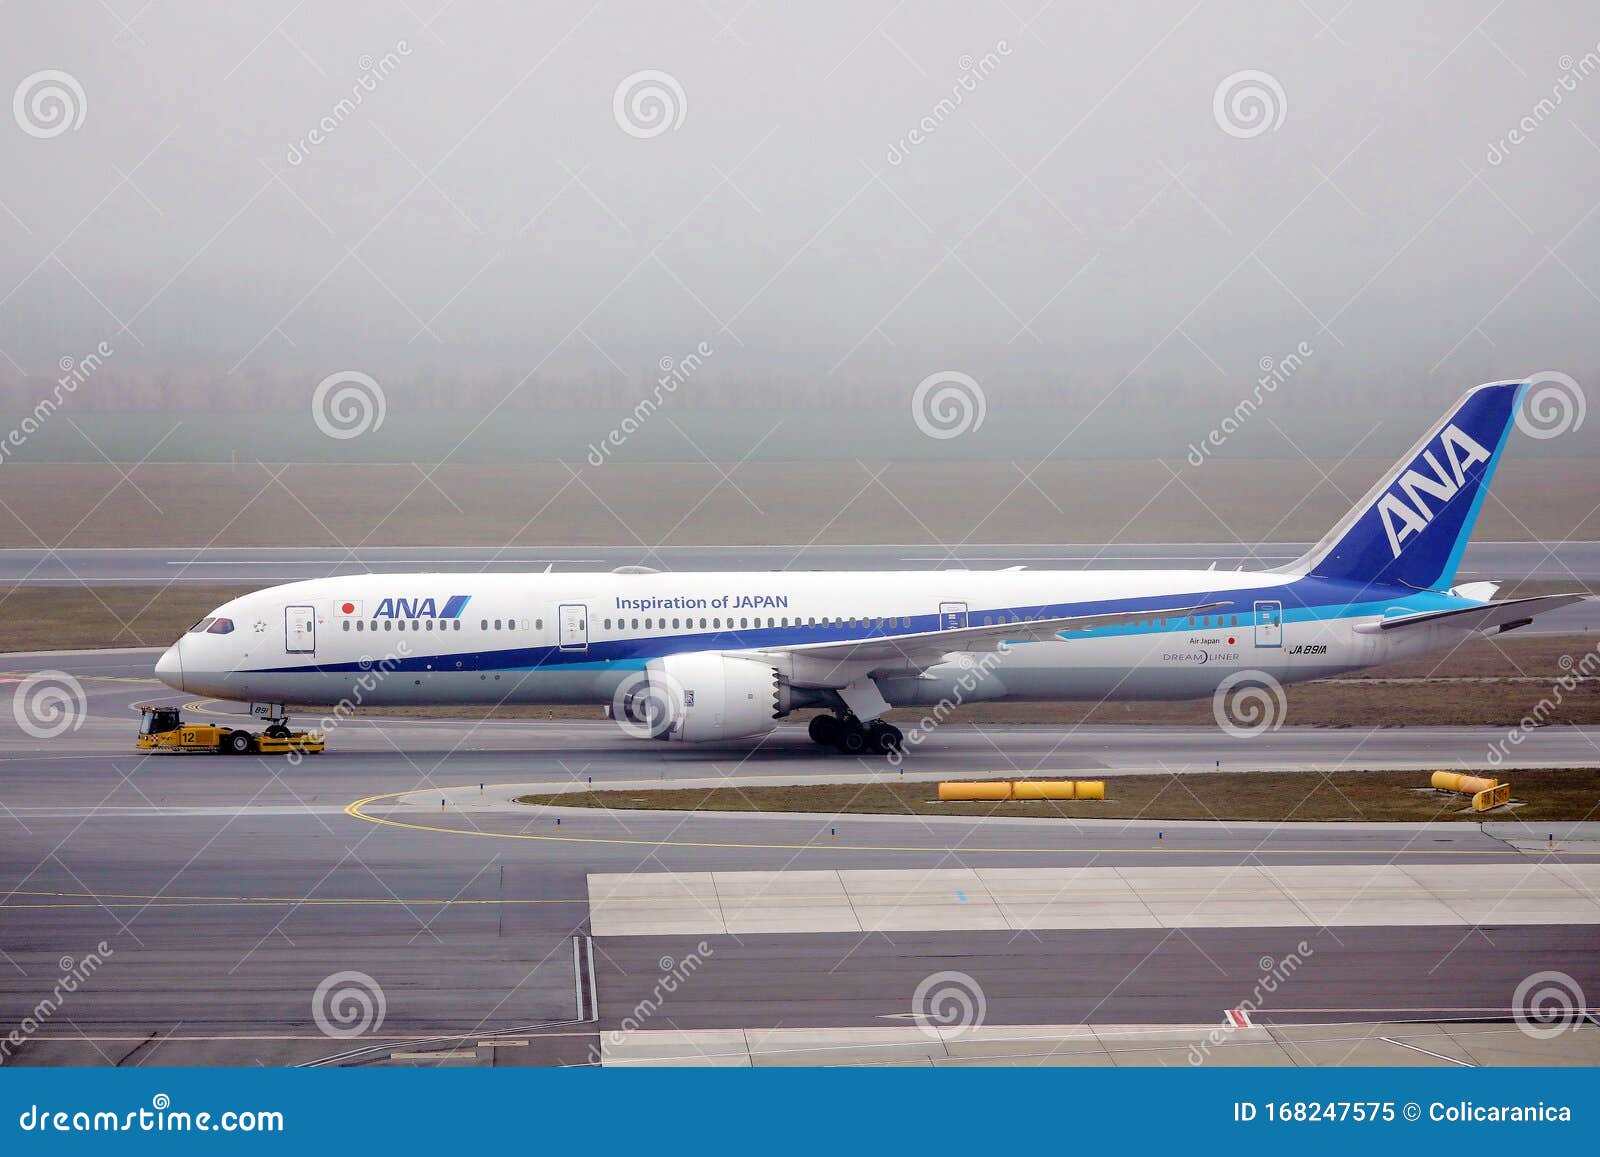 All Nippon Airways Ana Plane Being Towed Editorial Image Image Of Airports Land